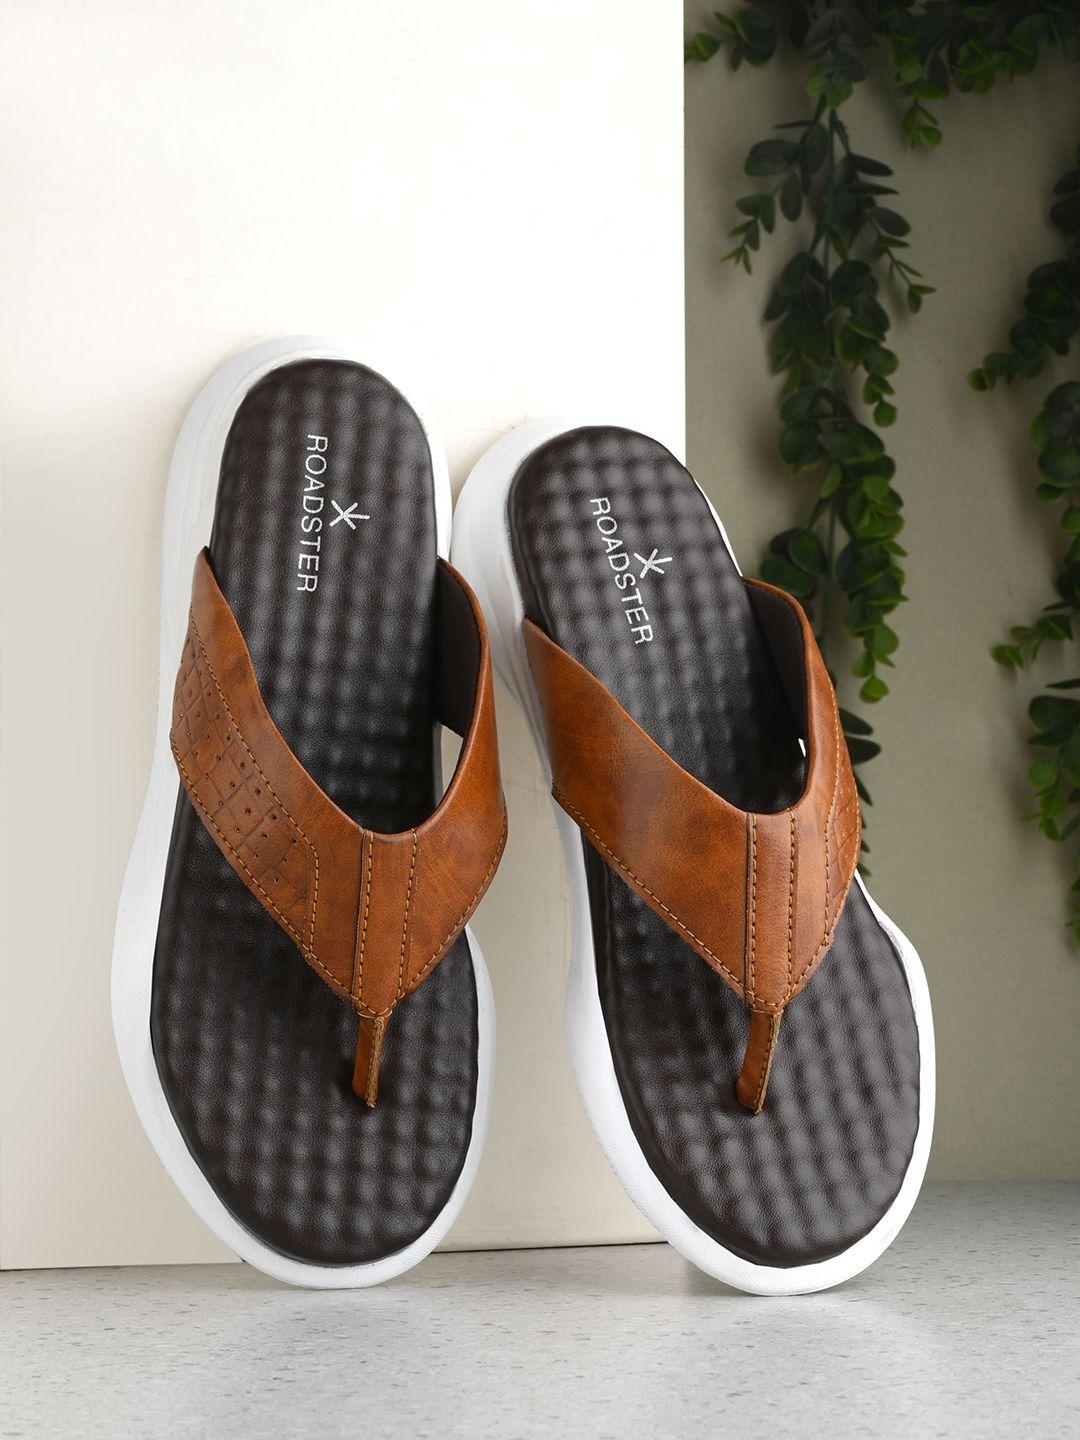 the roadster lifestyle co. shoe-style comfort sports sandals